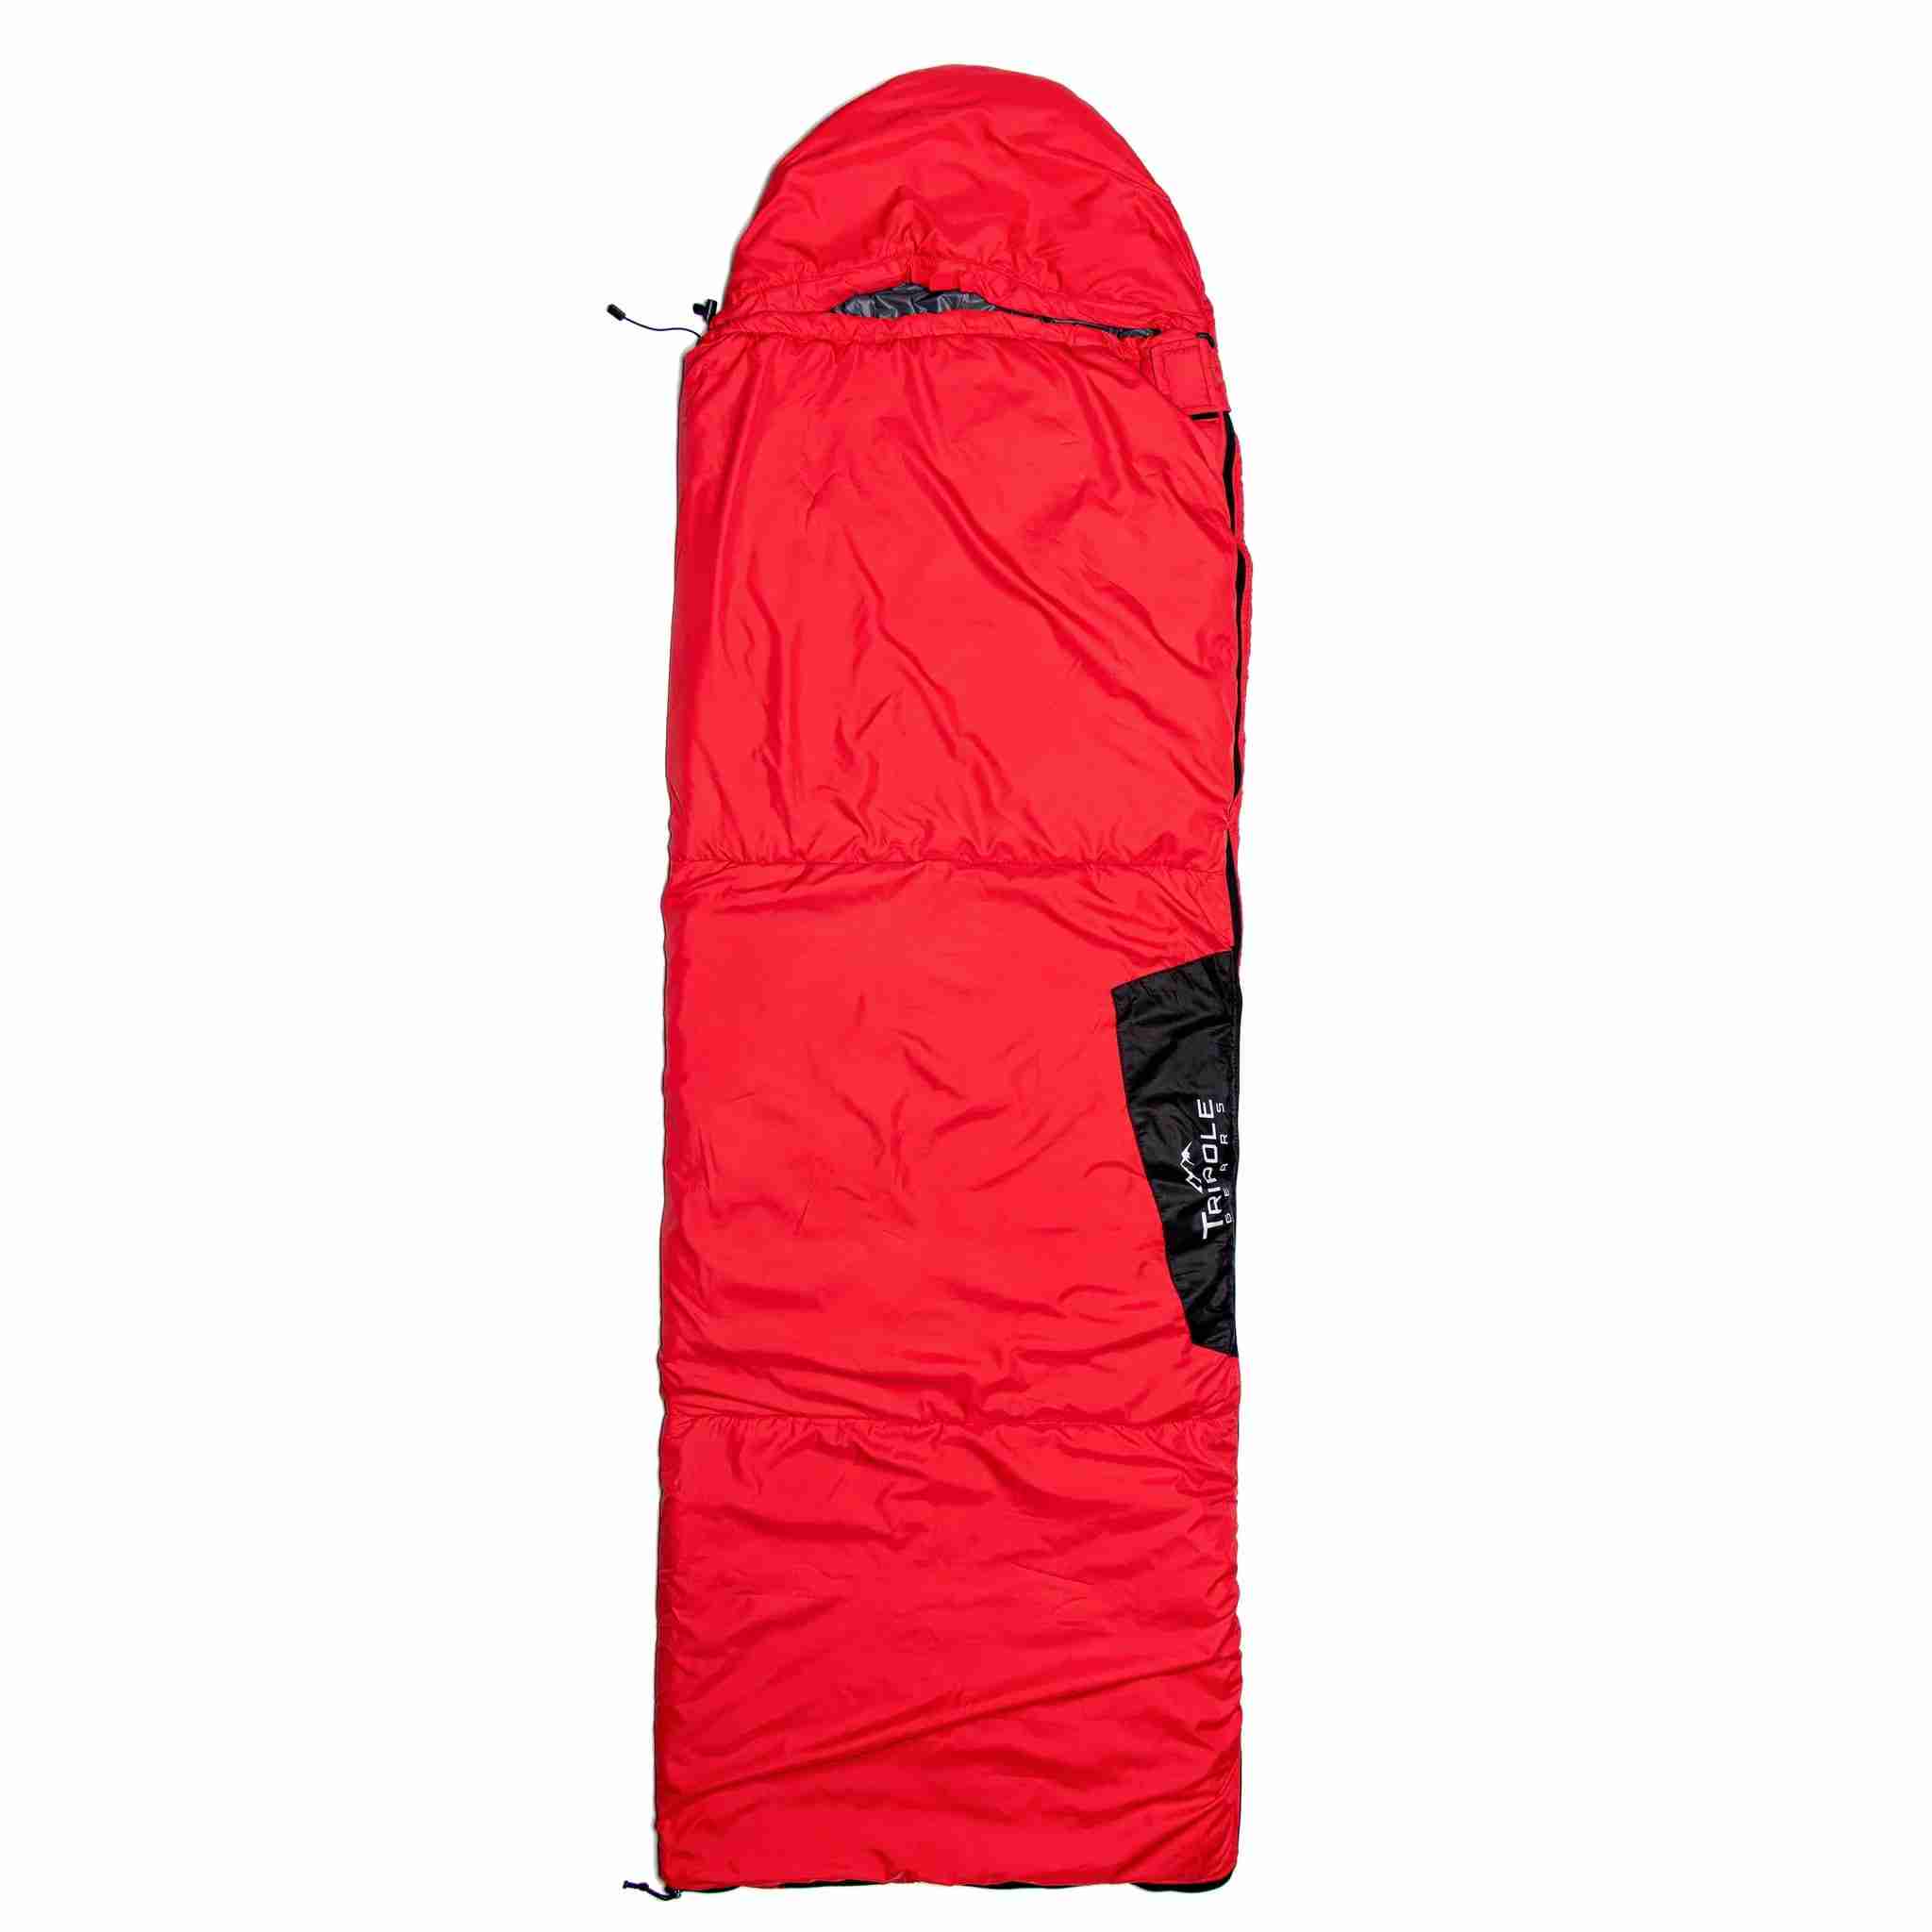 Embracing Comfort and Adventure: The Sleeping Bag Chronicles